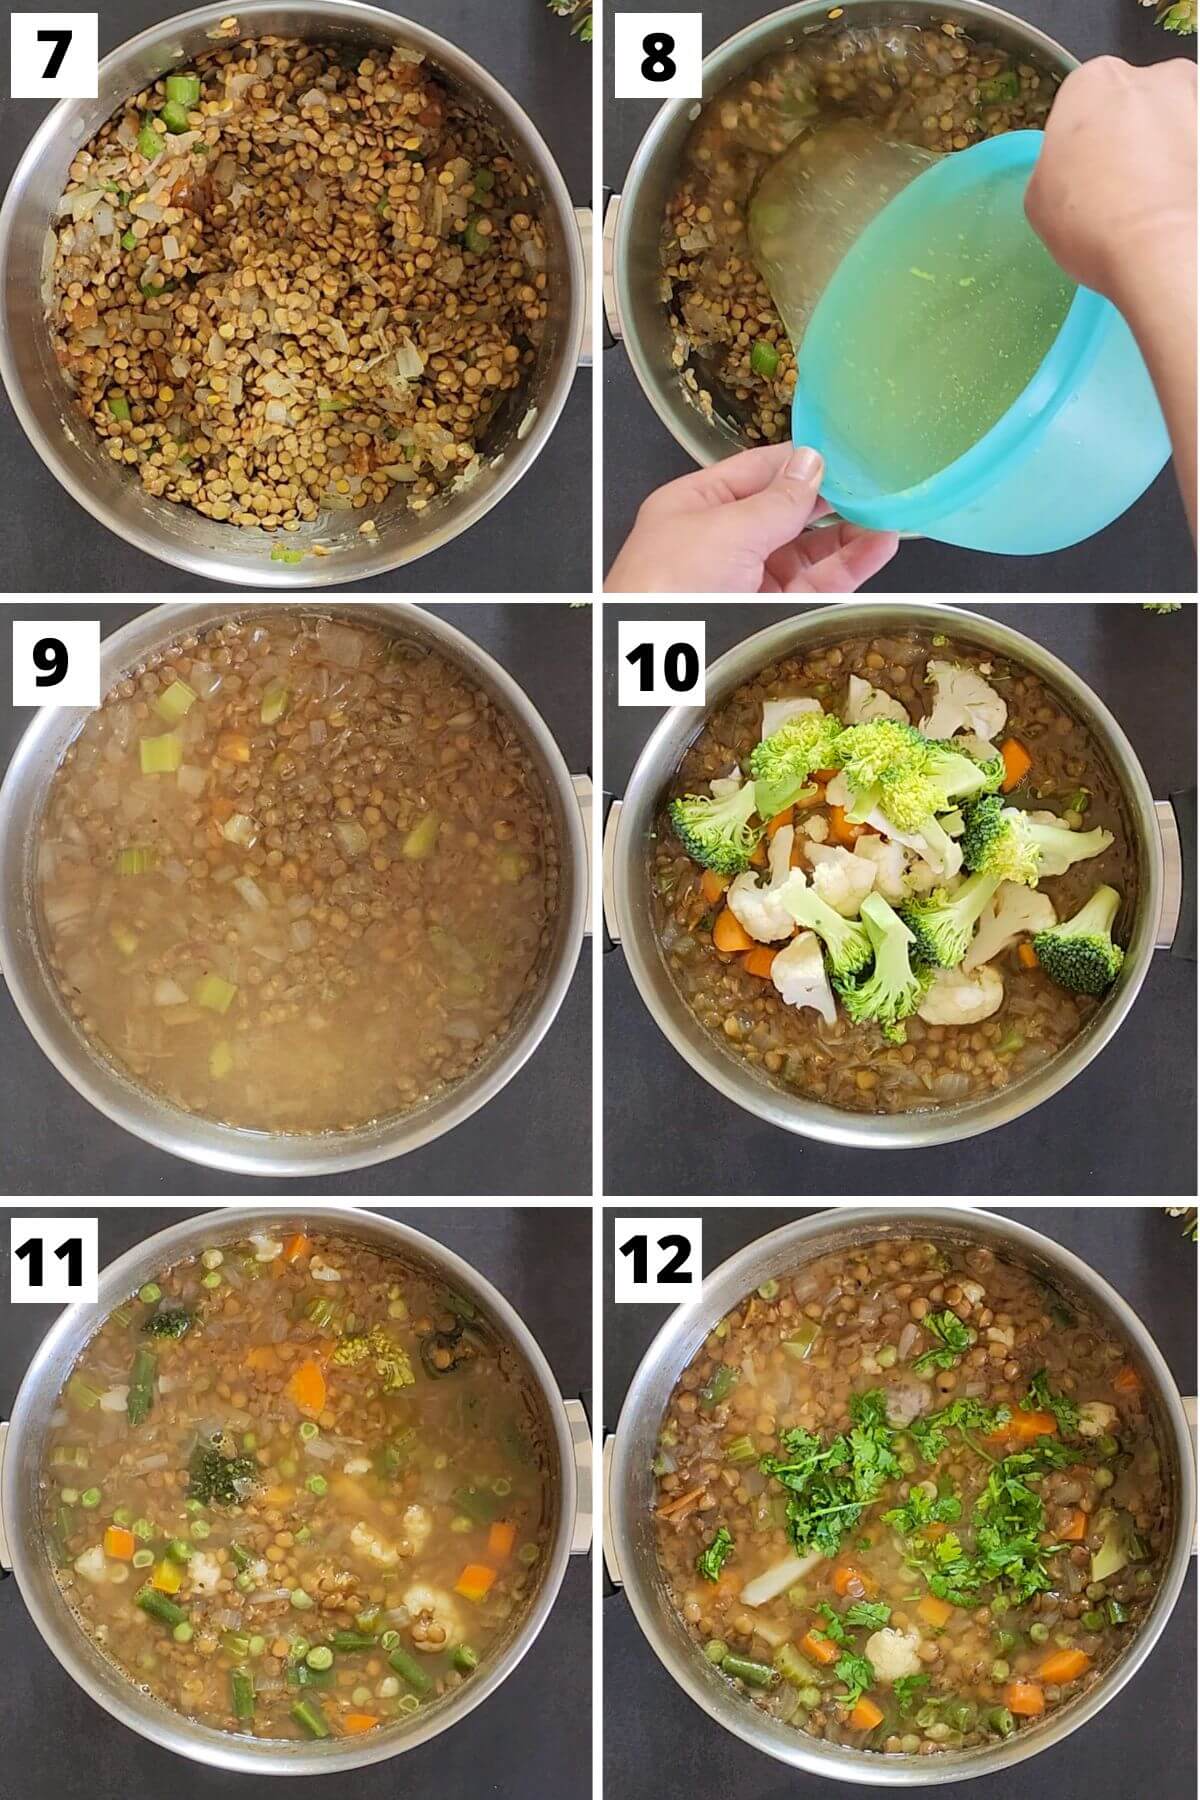 collage of steps 7 to 12 of vegetable lentil soup recipe.